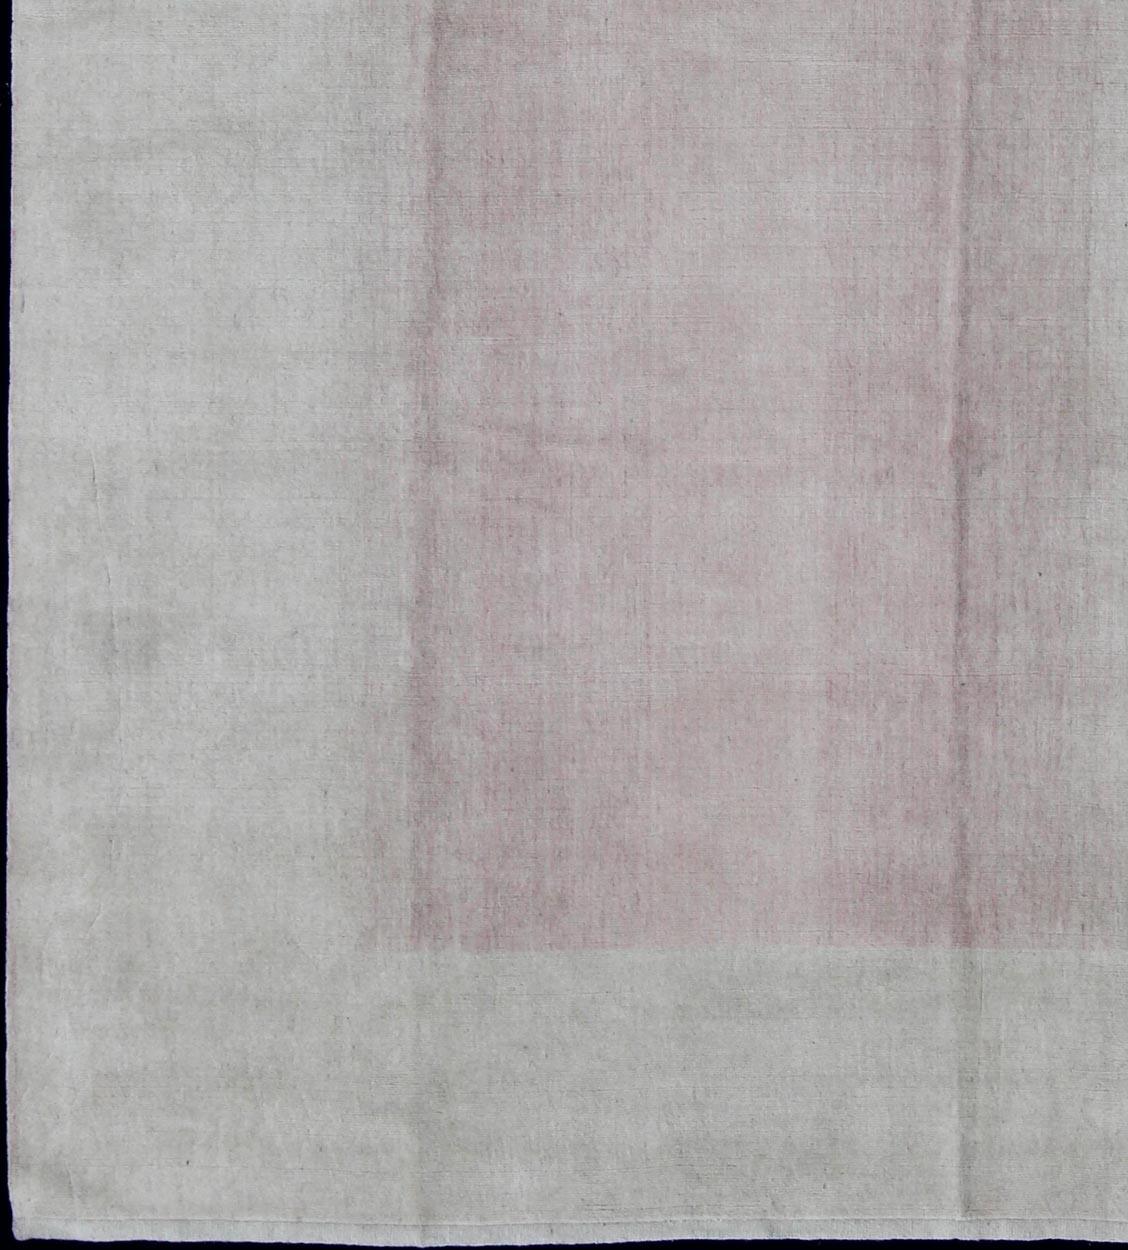 Blended Tibetan modern rug, rug 19-0830, country of origin / type: Nepal / Modern

This rug from Nepal features a subtle blending of pink and white tones.
Measures: 7'9 x 12'3.